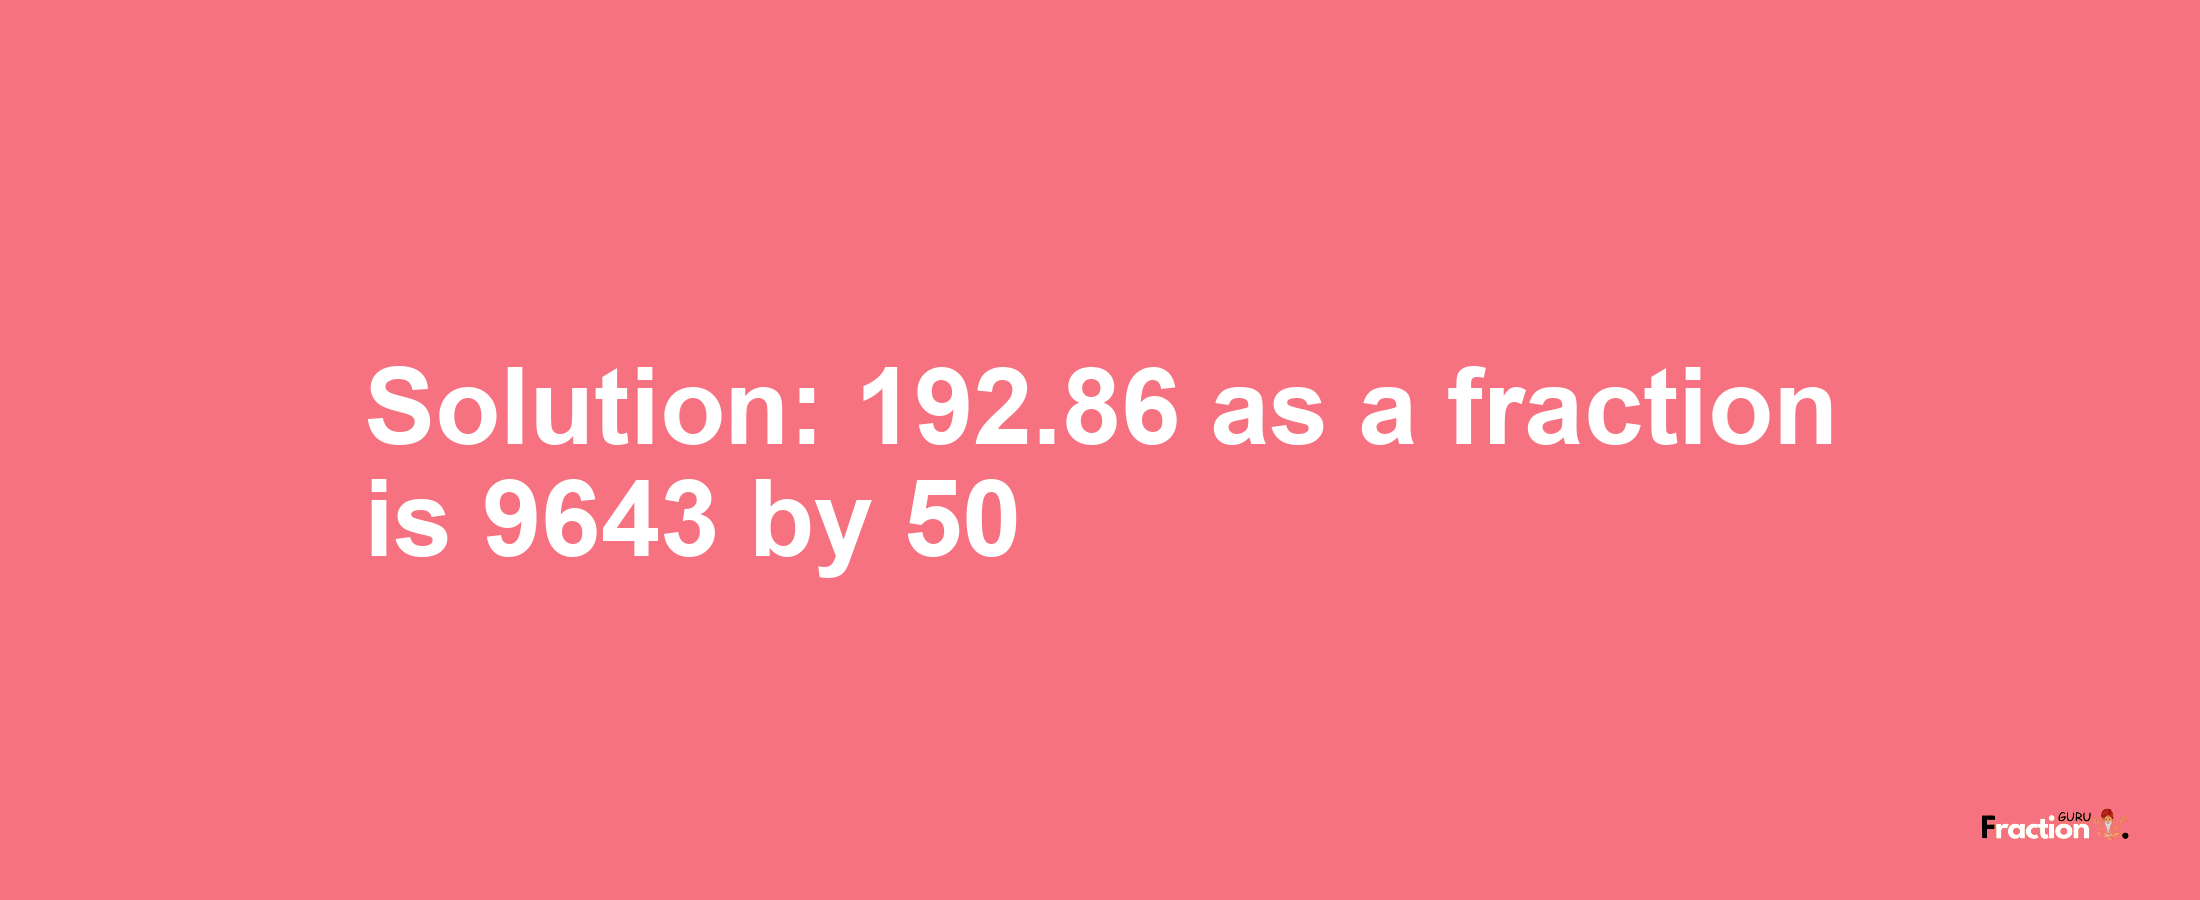 Solution:192.86 as a fraction is 9643/50